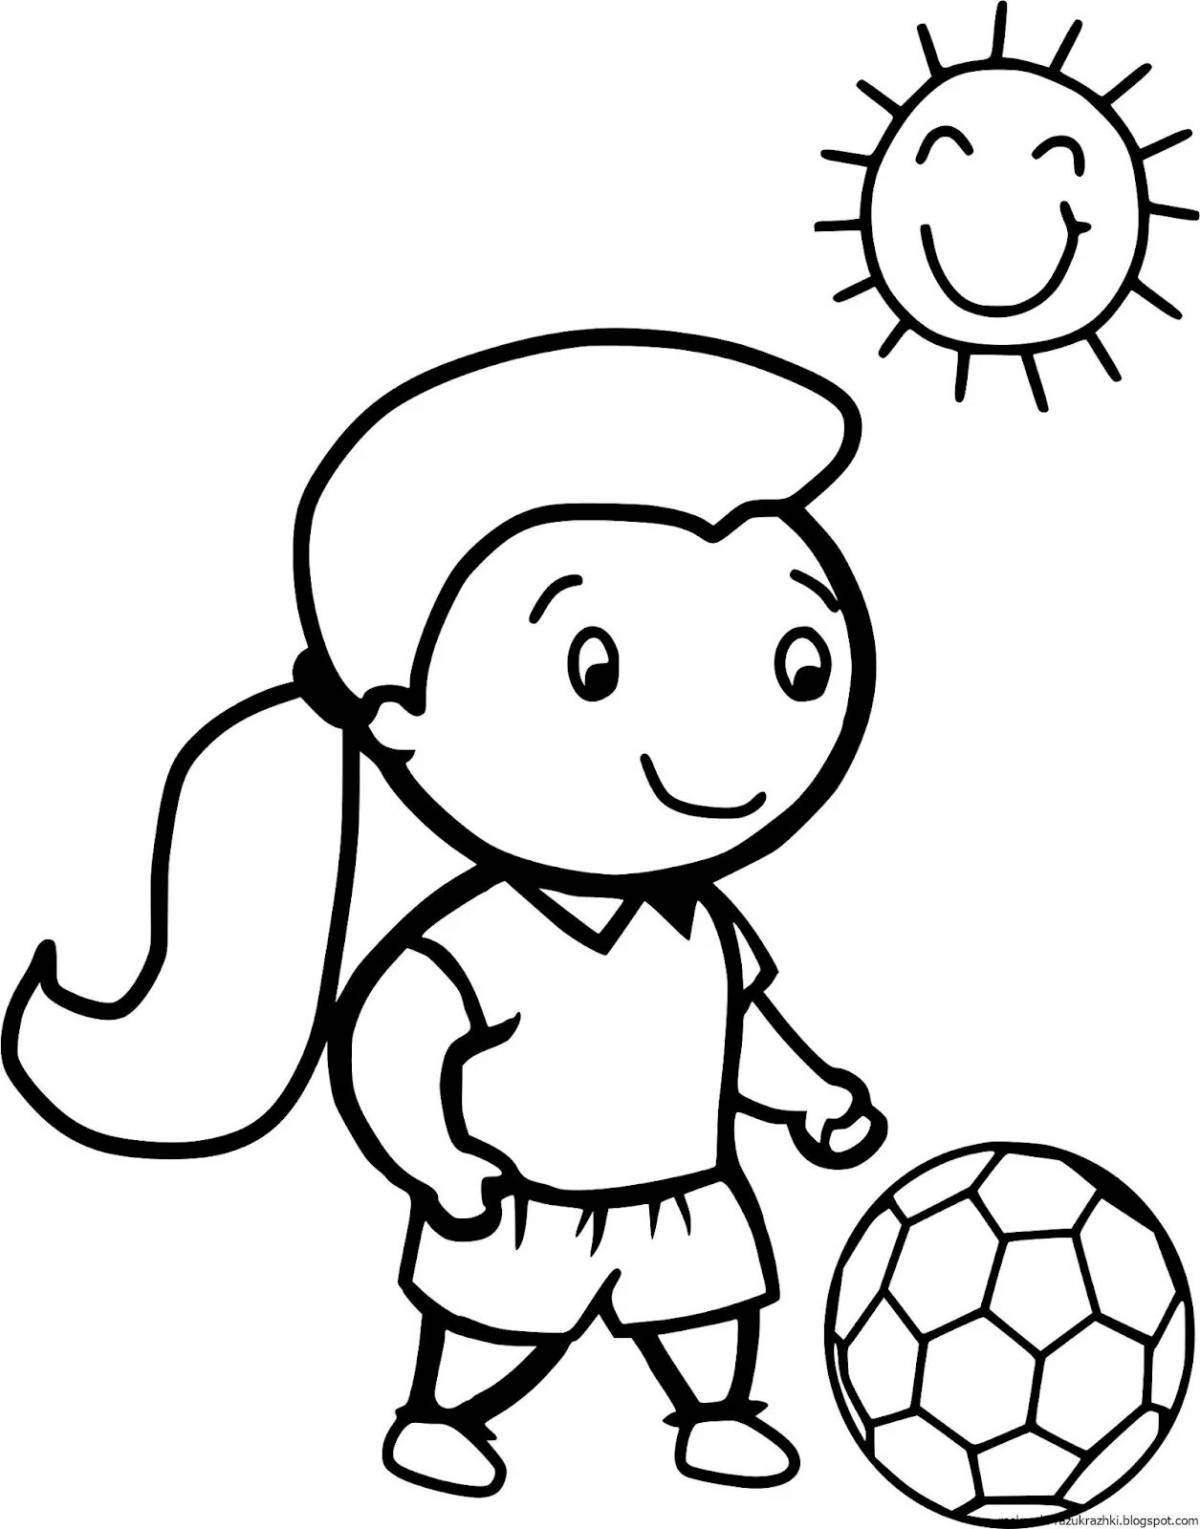 Colorful sports coloring pages for kids